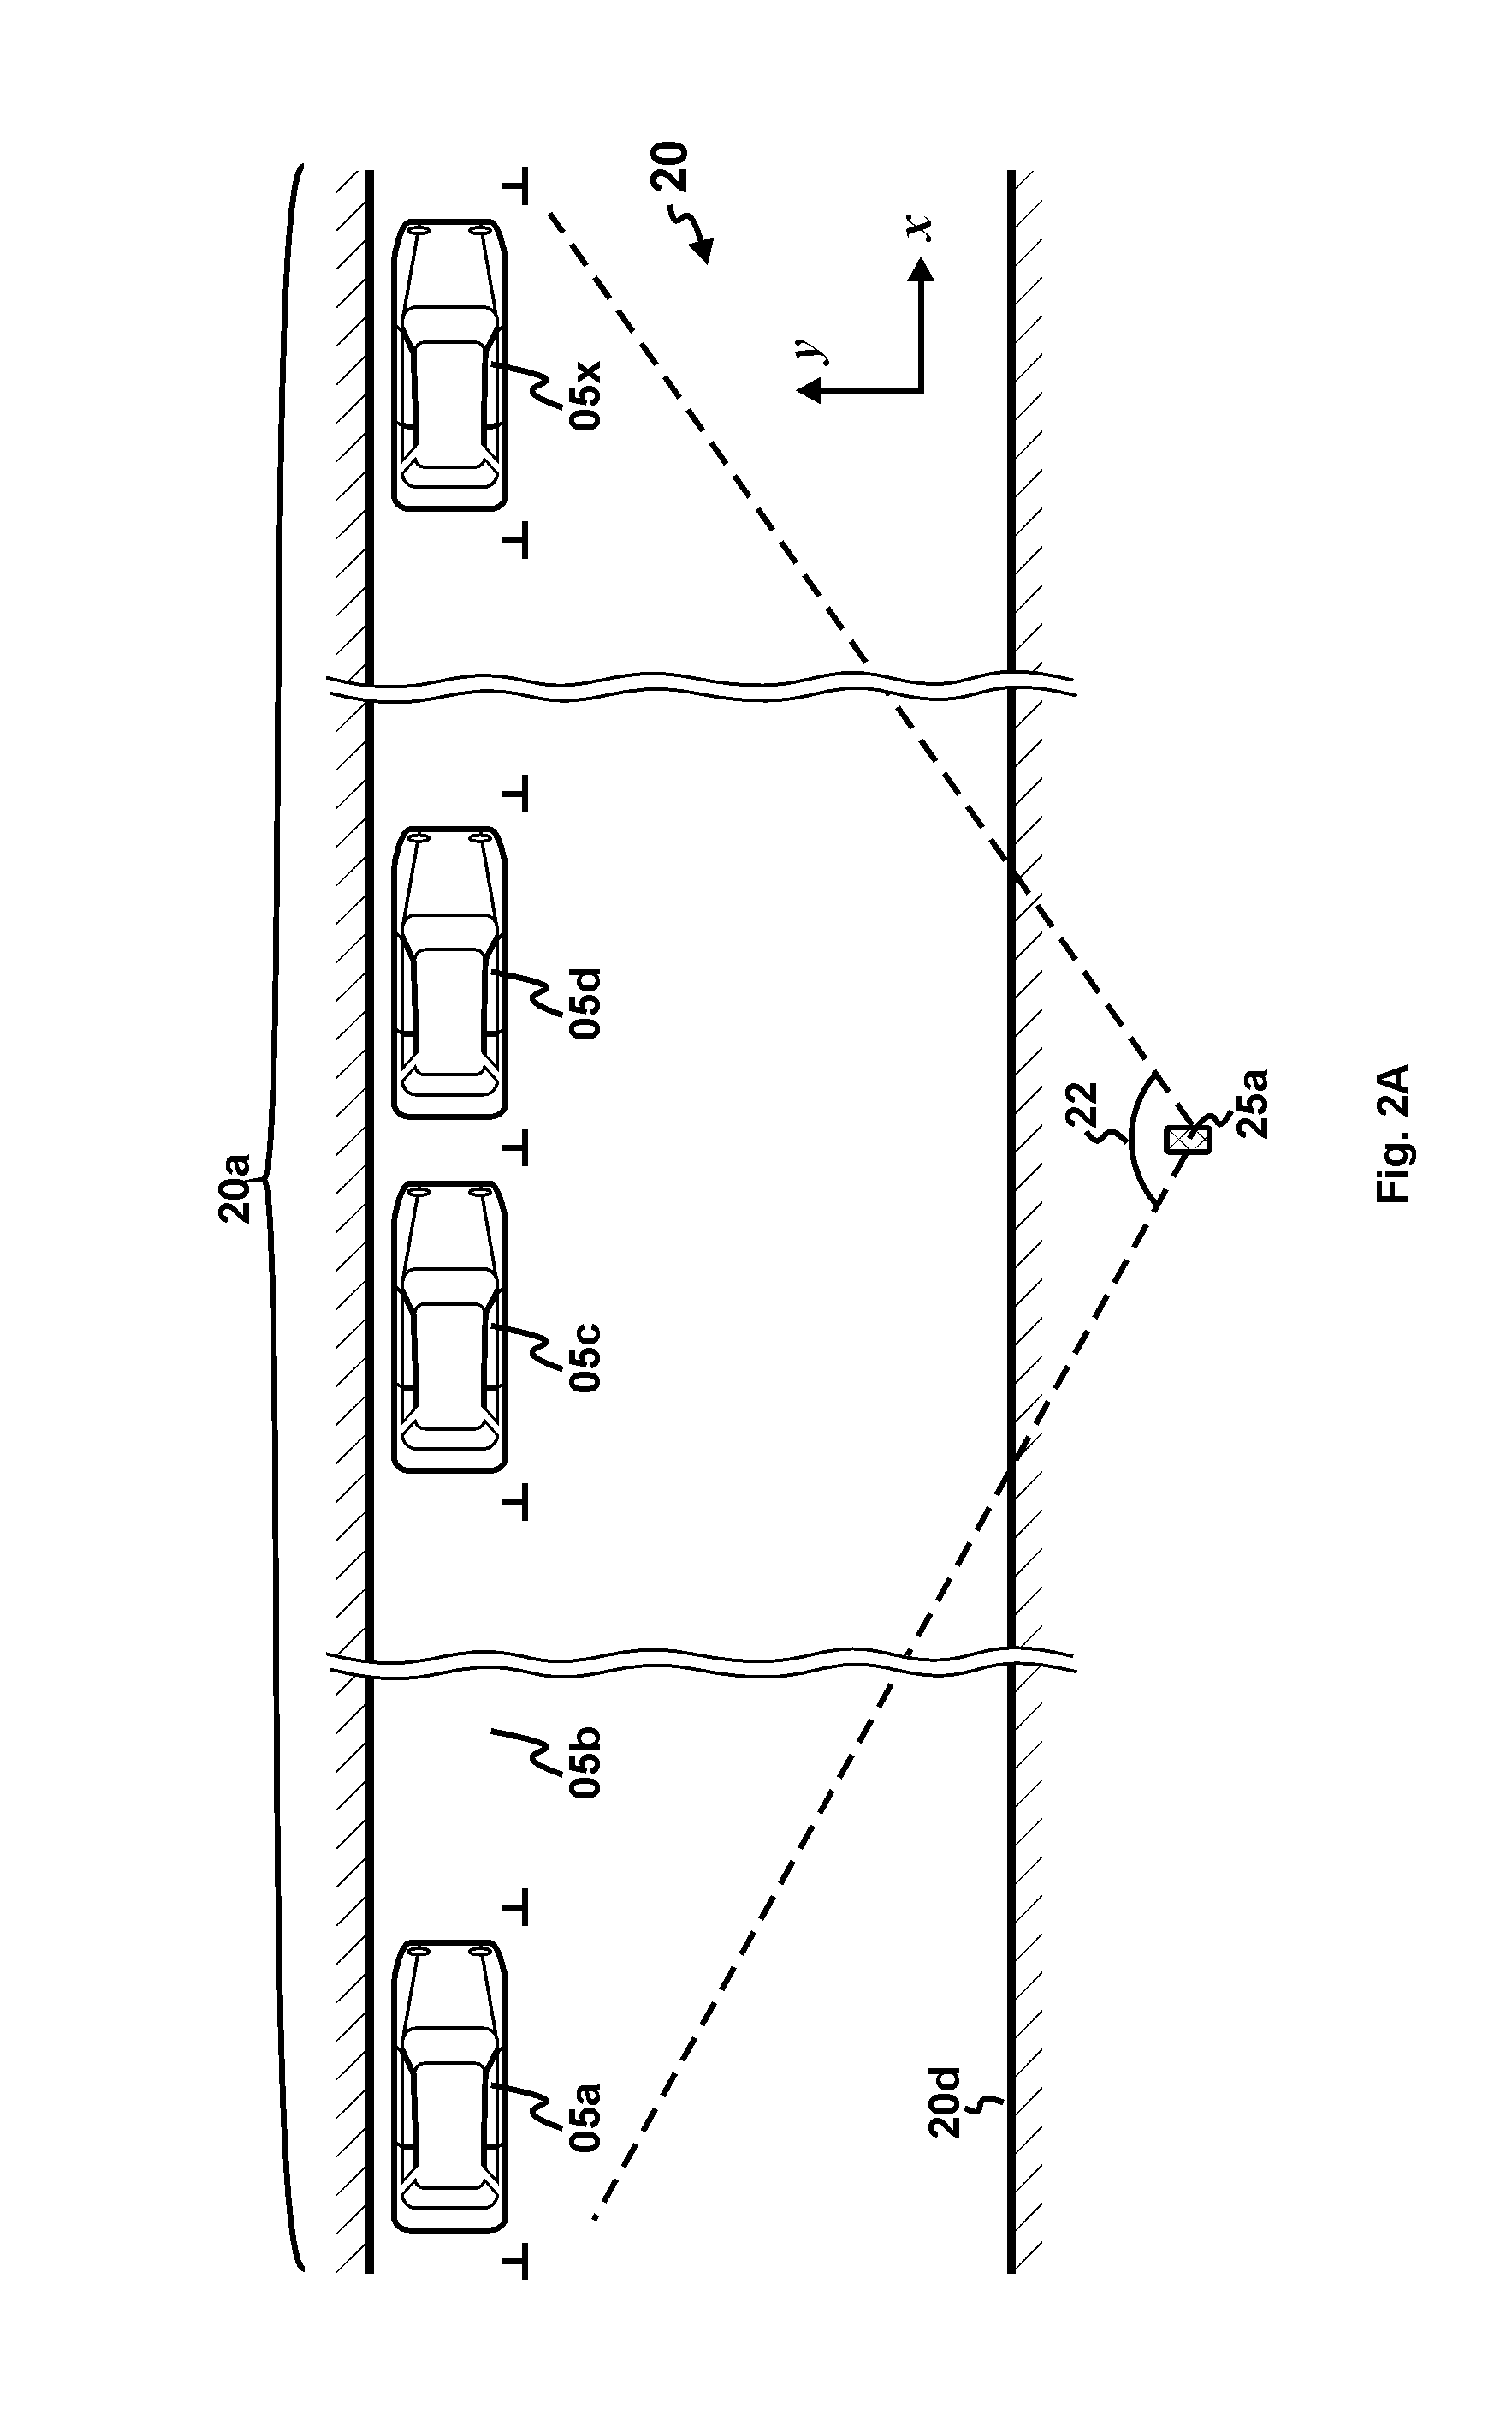 Large-area parking-monitoring system